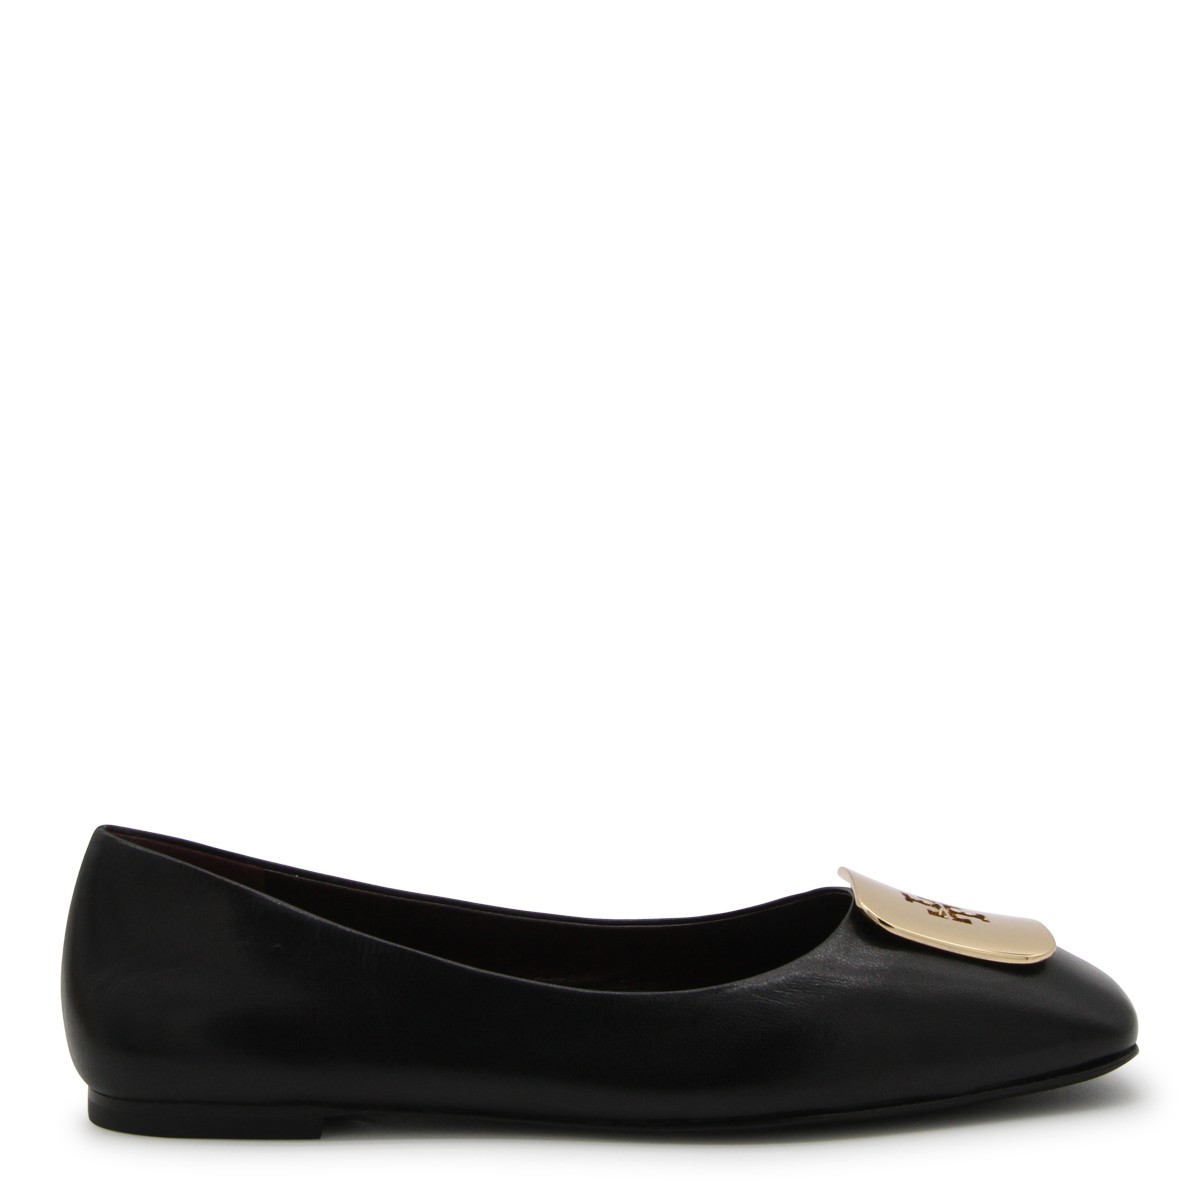 BLACK LEATHER BALLERINA SHOES